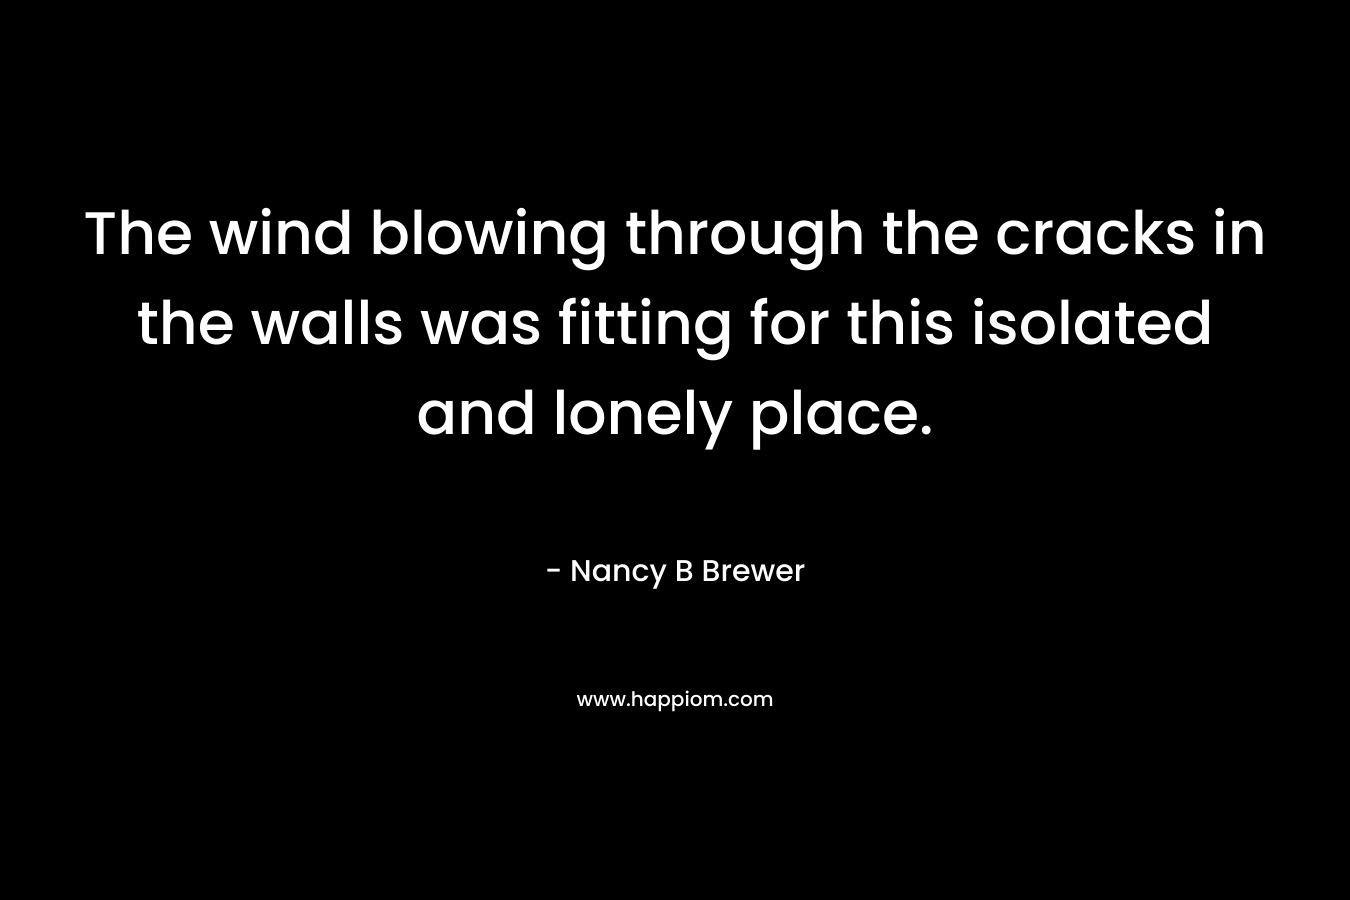 The wind blowing through the cracks in the walls was fitting for this isolated and lonely place.